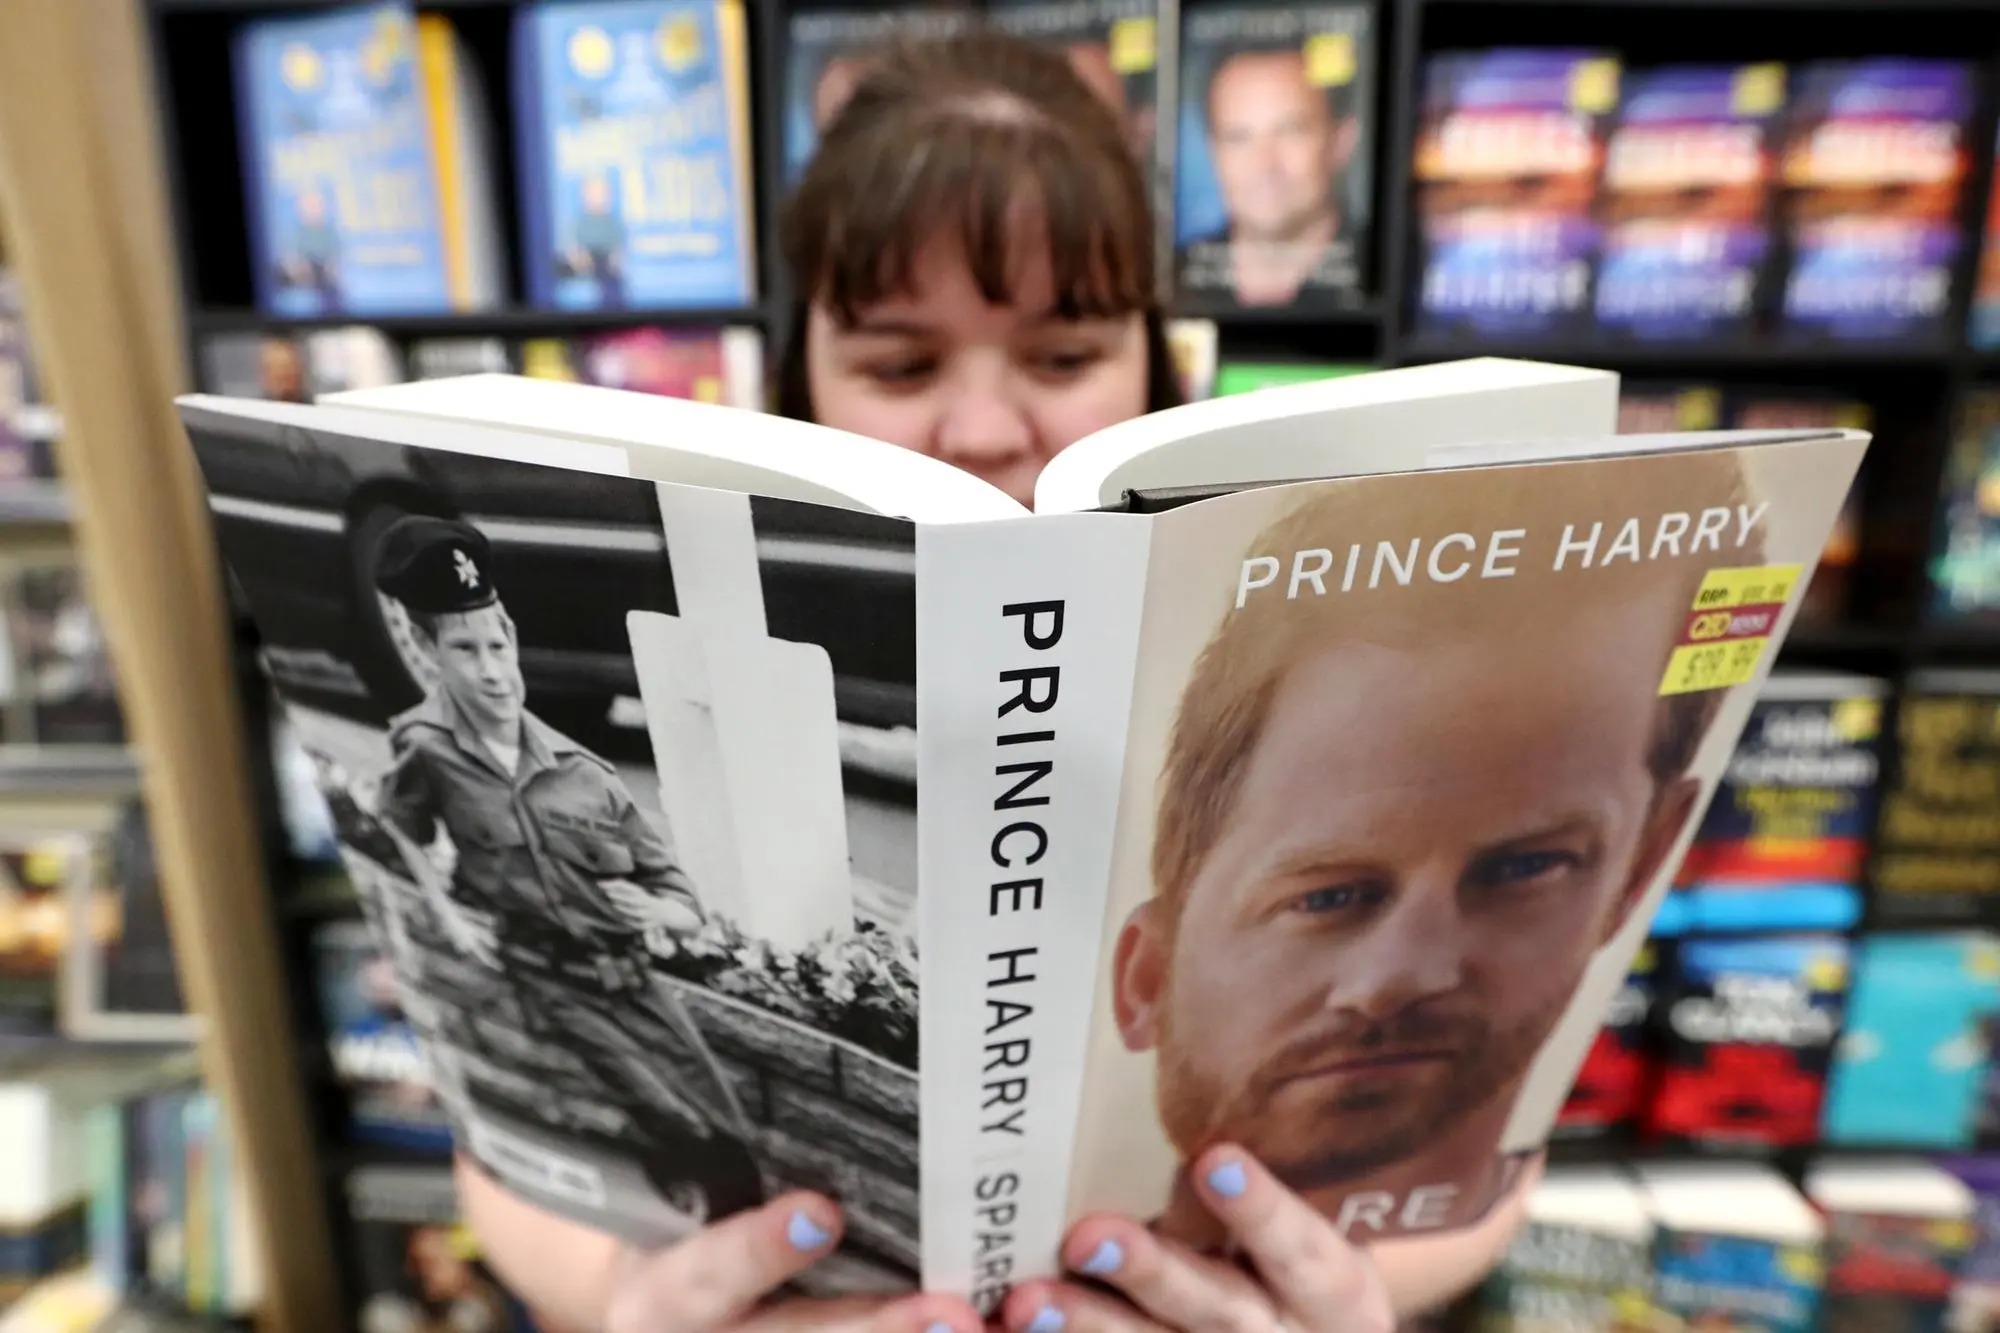 epa10399370 Prince Harry's memoir Spare is opened at a book store in Gold Coast, Australia, 11 January 2023. The publisher of the memoir says the book has become the United Kingdom's fastest selling non-fiction book ever. EPA/JASON O'BRIEN AUSTRALIA AND NEW ZEALAND OUT